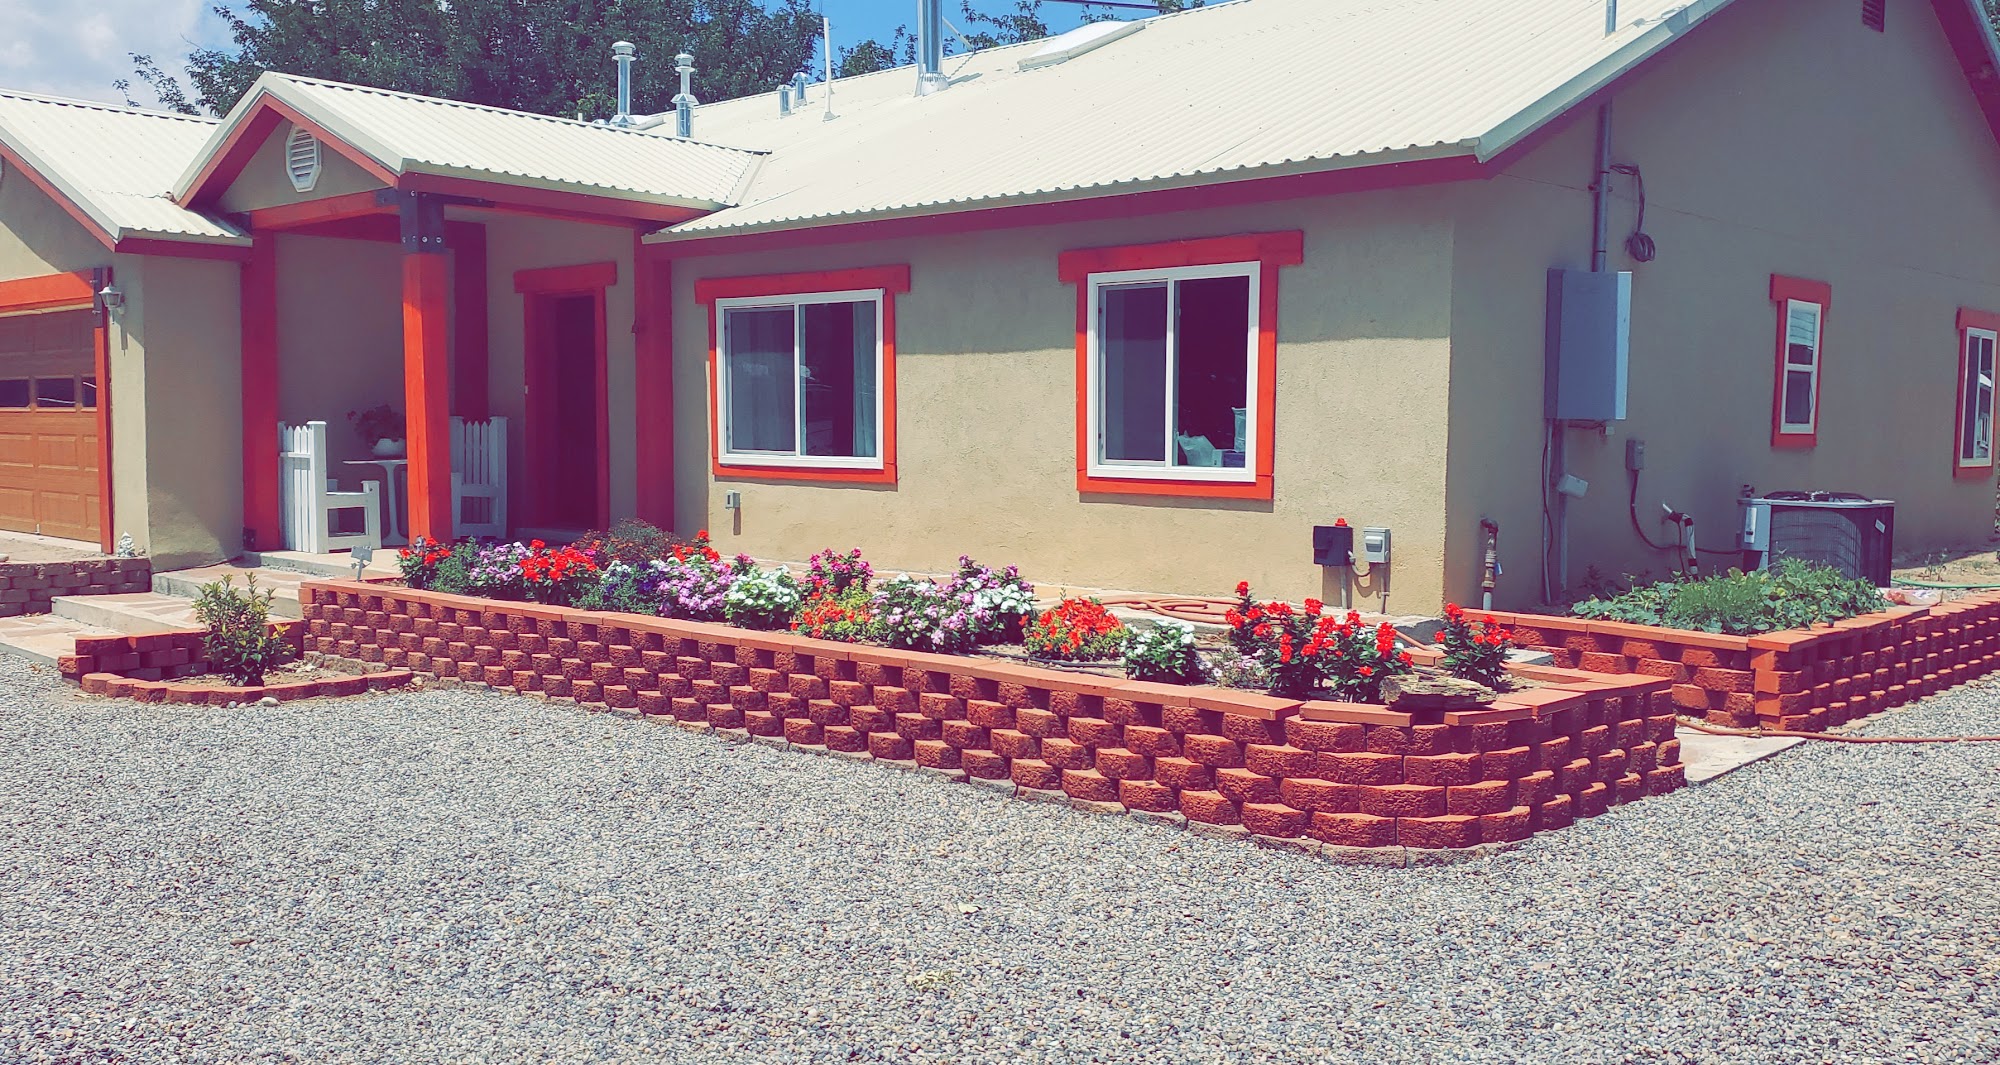 Rubios Landscaping Services LLC 370 Pine St, Bosque Farms New Mexico 87068